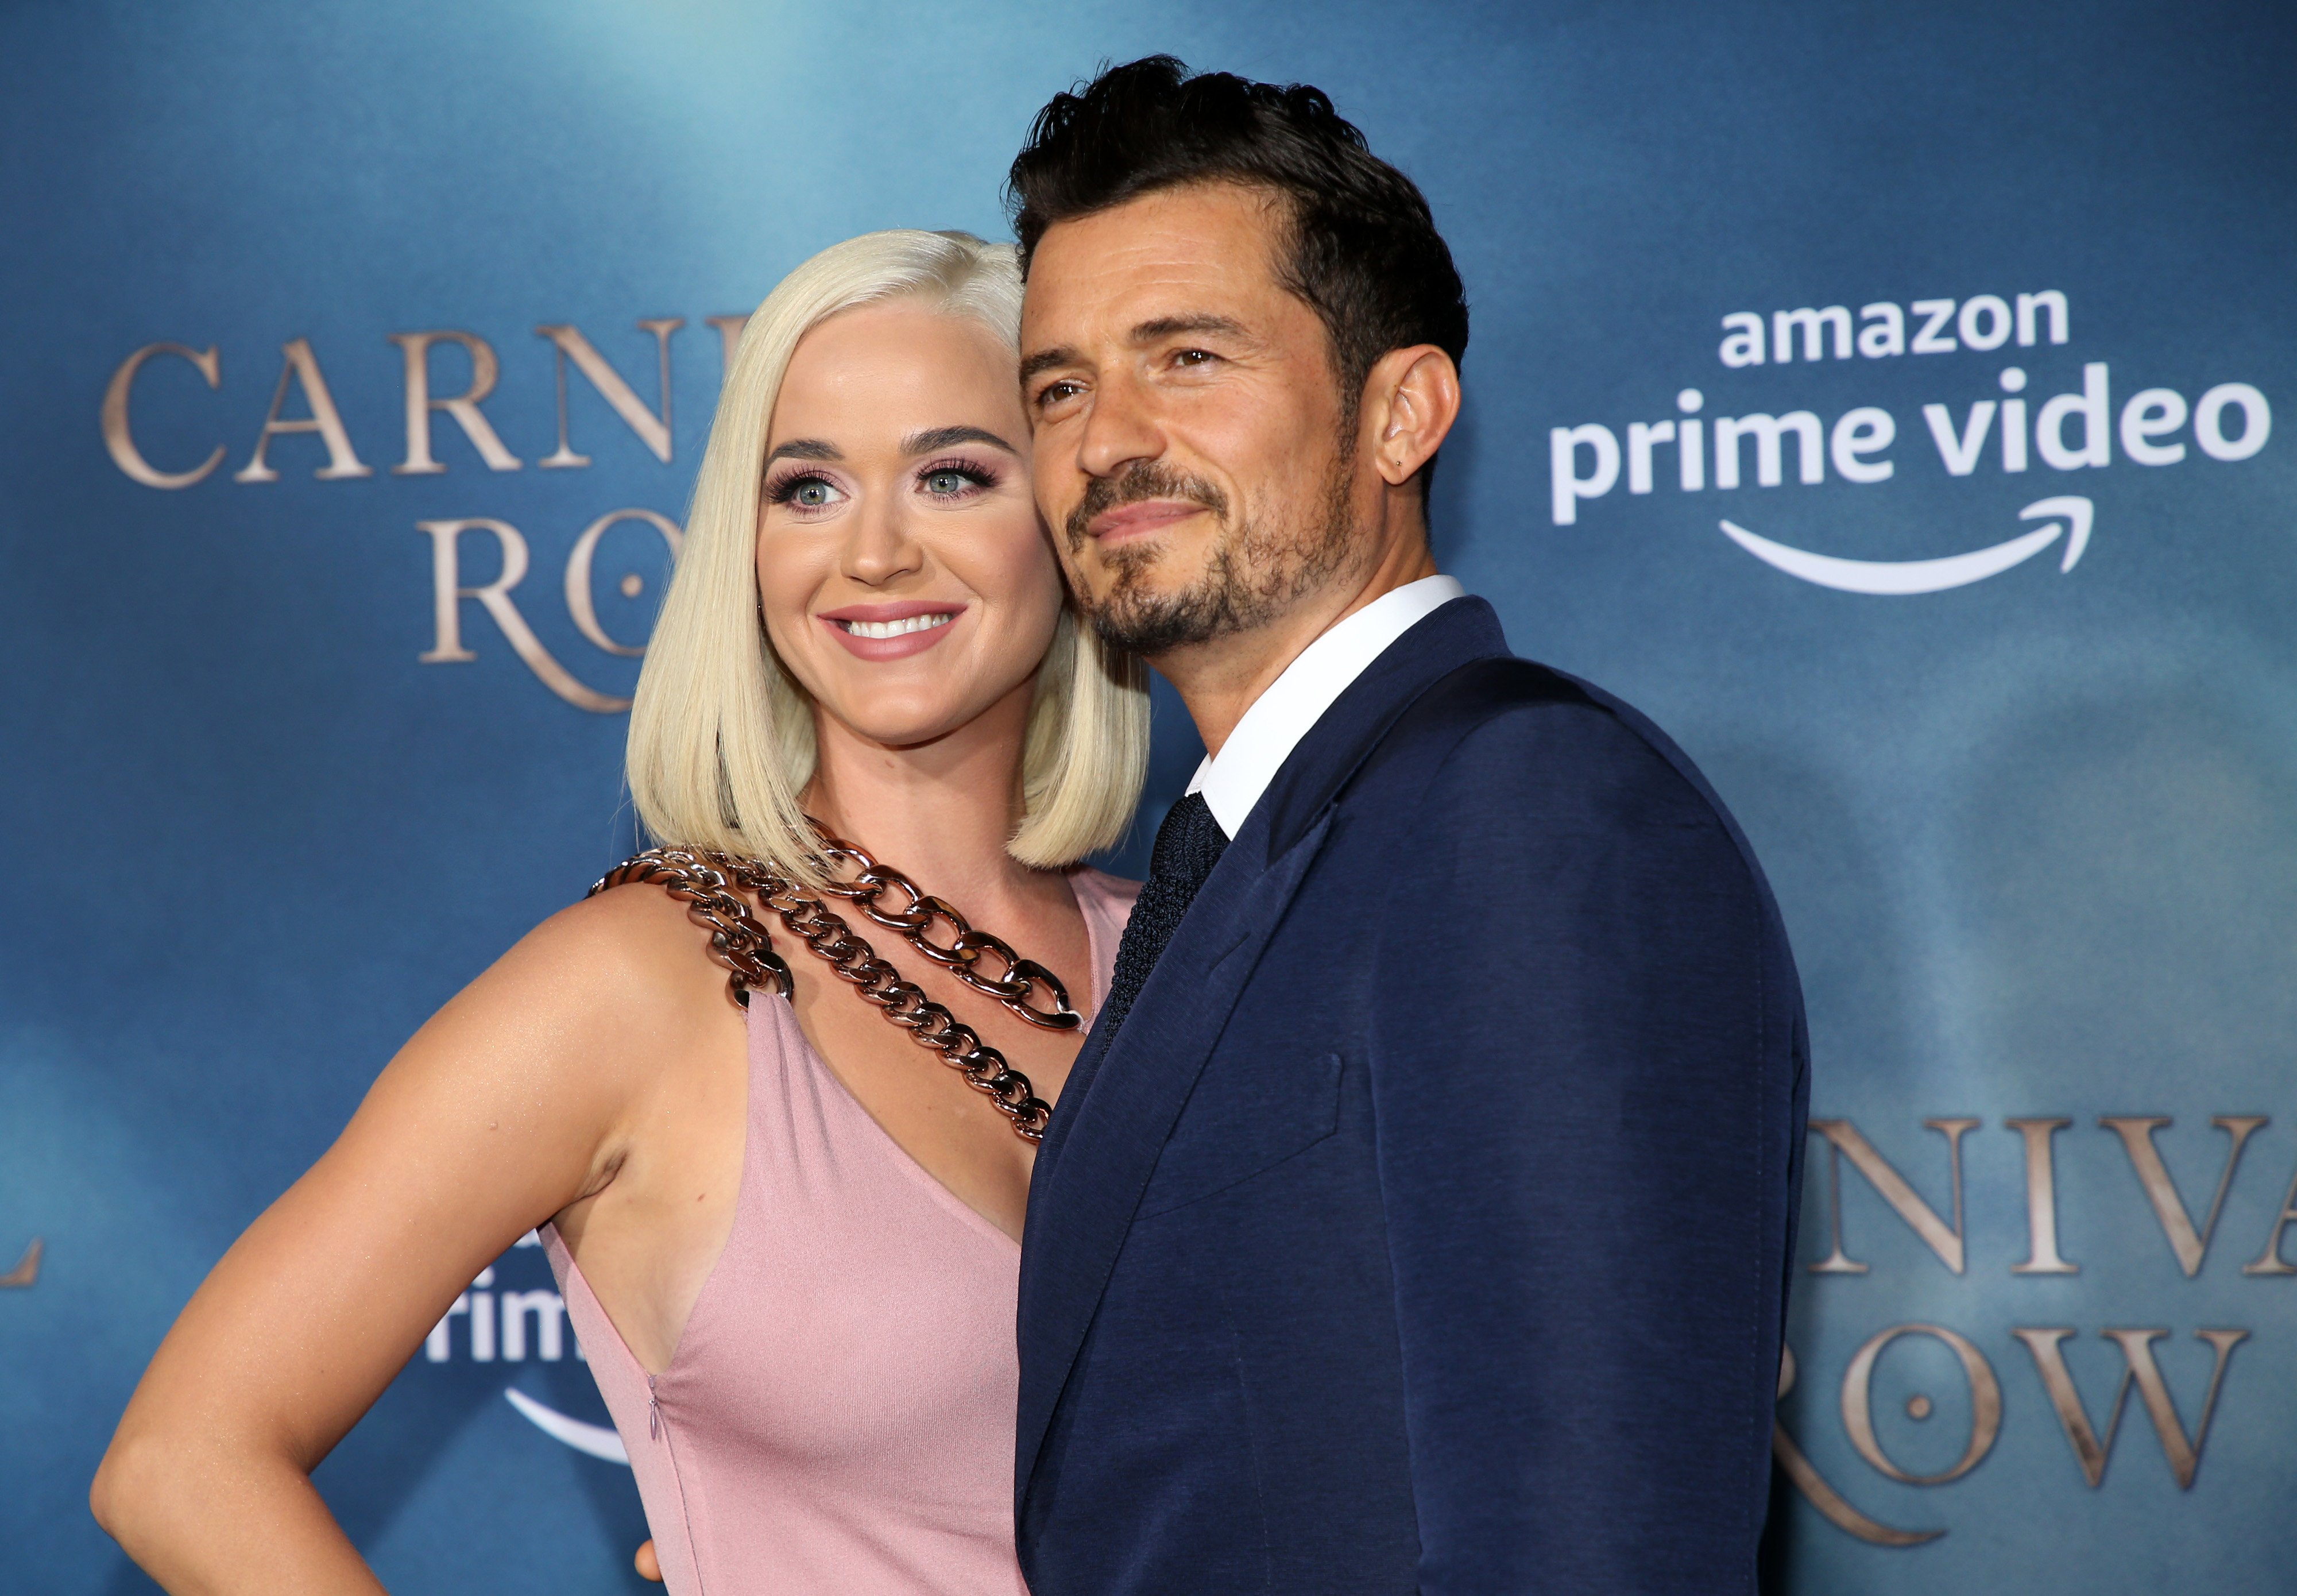 Katy Perry and Orlando Bloom attend the premiere of "Carnival Row"  on August 21, 2019, in Hollywood, California. | Source: Getty Images.